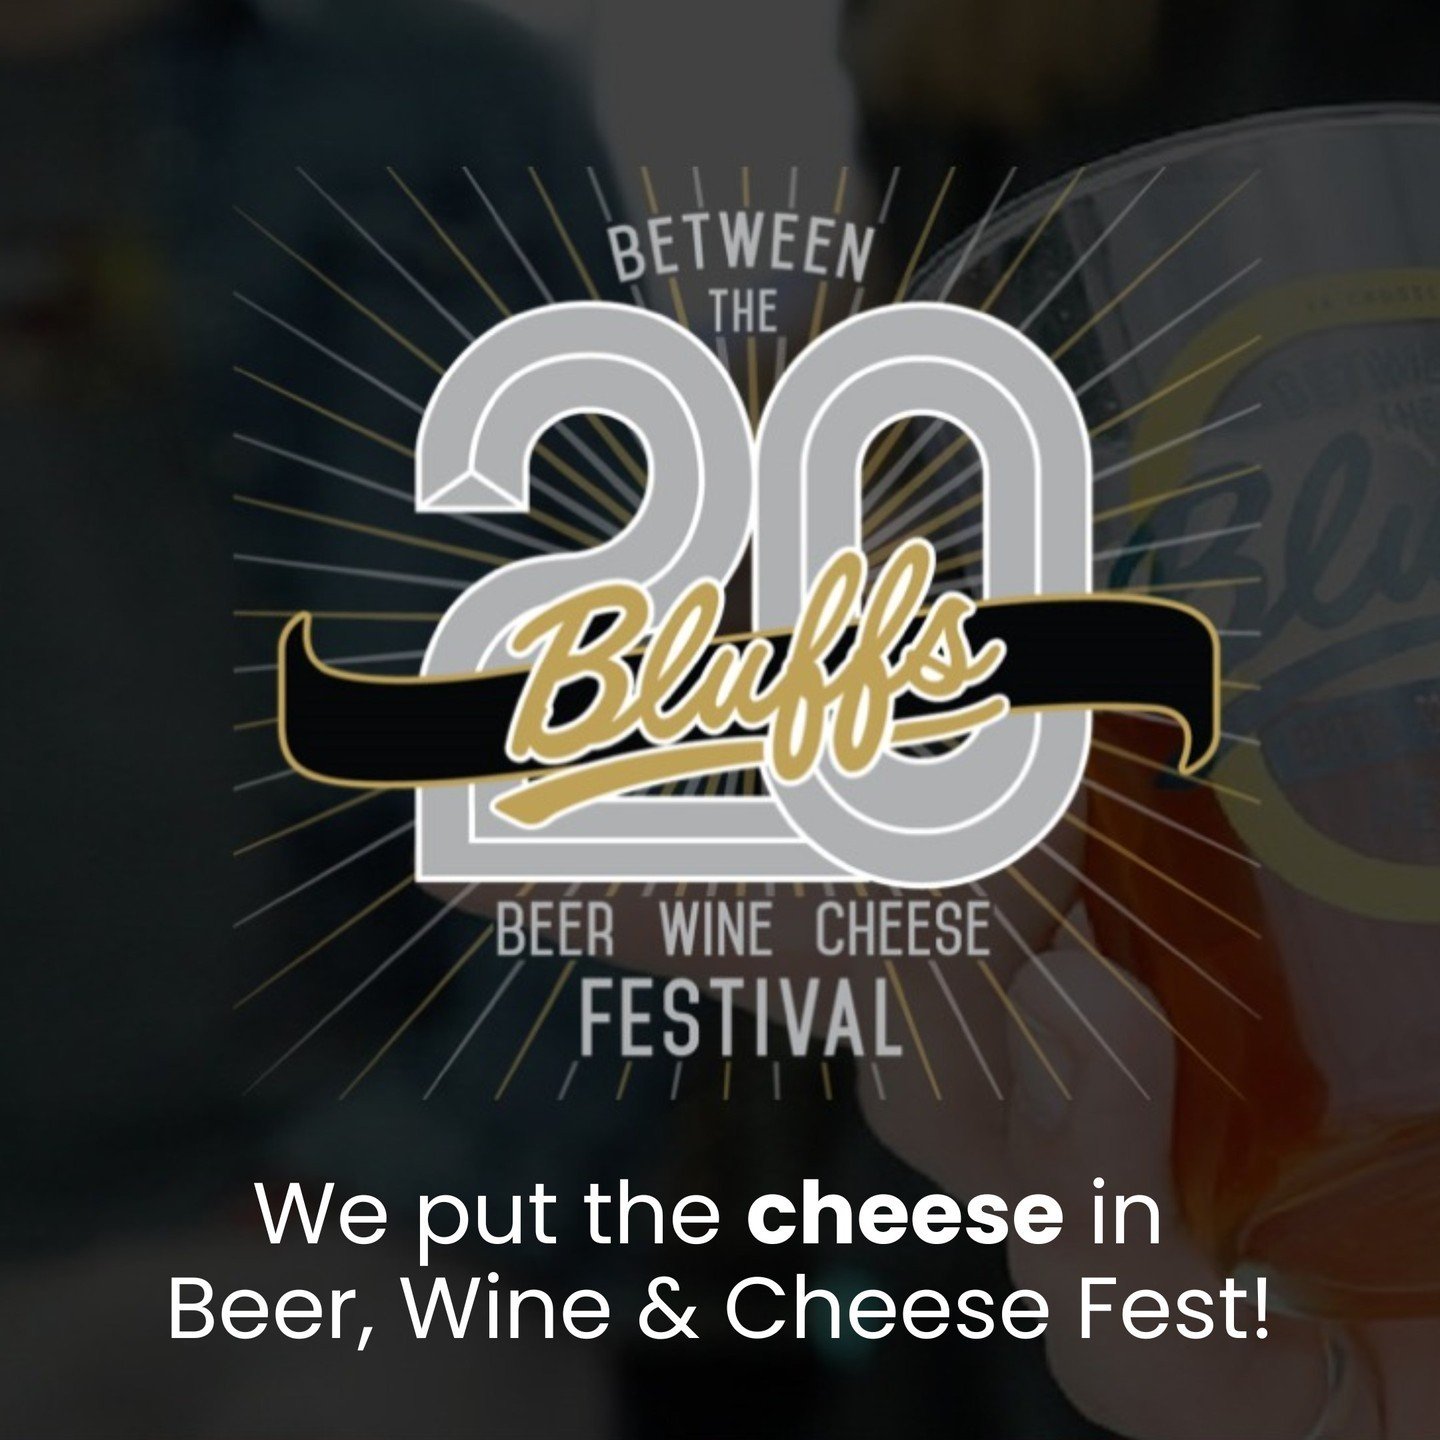 We can't wait to be joining for a second year at @betweenthebluffsofficial Beer Wine and Cheese Fest - will we see YOU this weekend?! 🍺🍷🧀

#HuntAndGatherGrazing #WeBringTheCheese #BeerWineCheeseFest